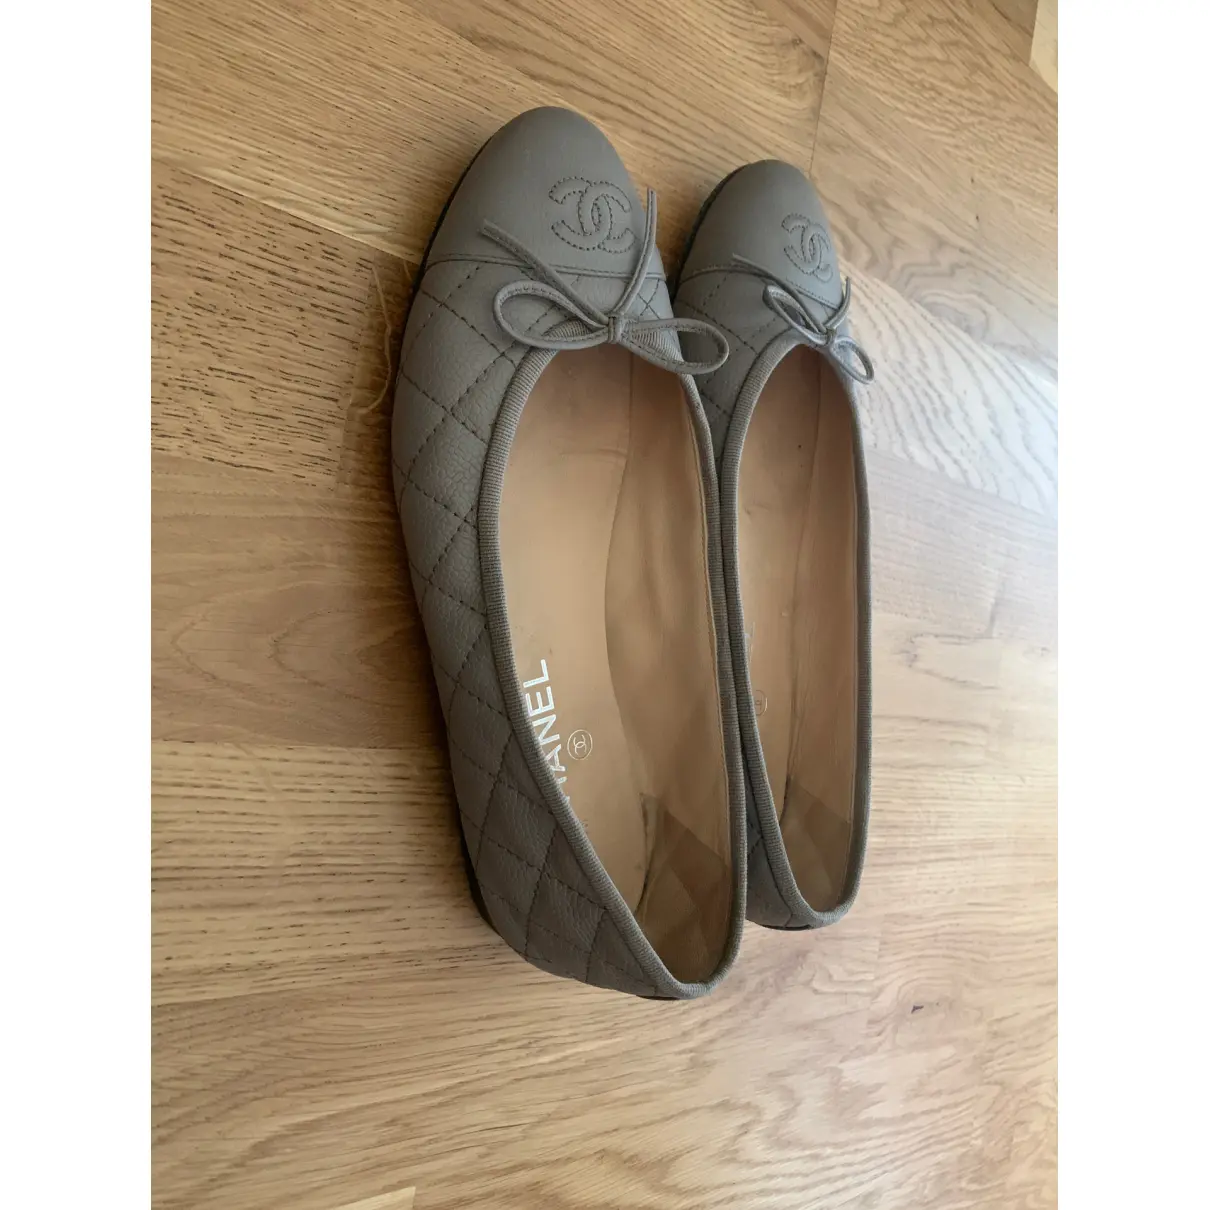 Buy Chanel Leather ballet flats online